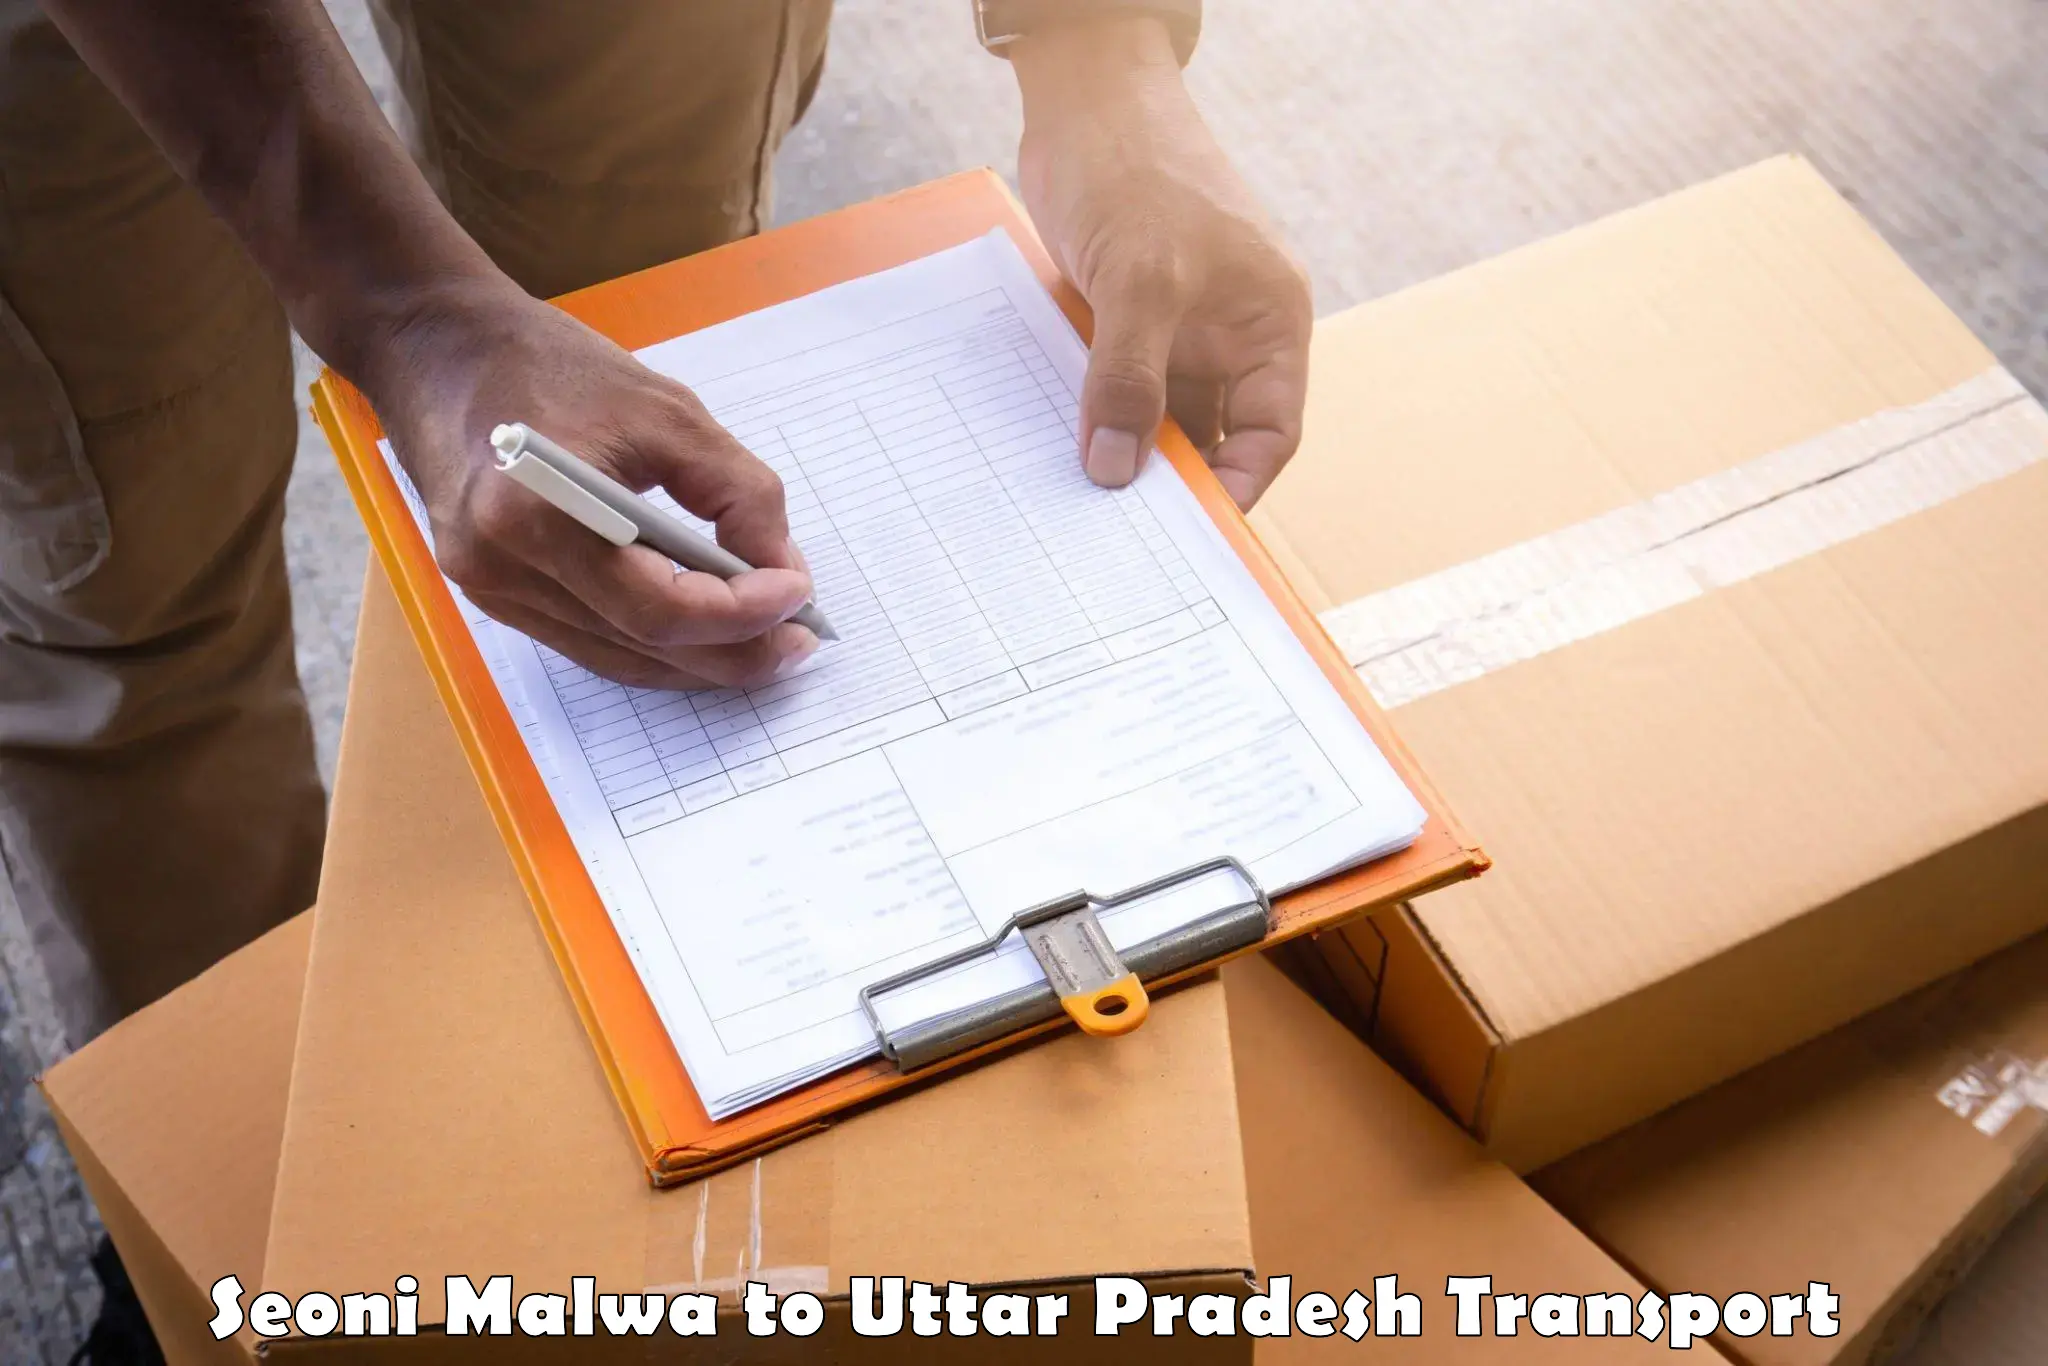 Road transport online services Seoni Malwa to Allahabad